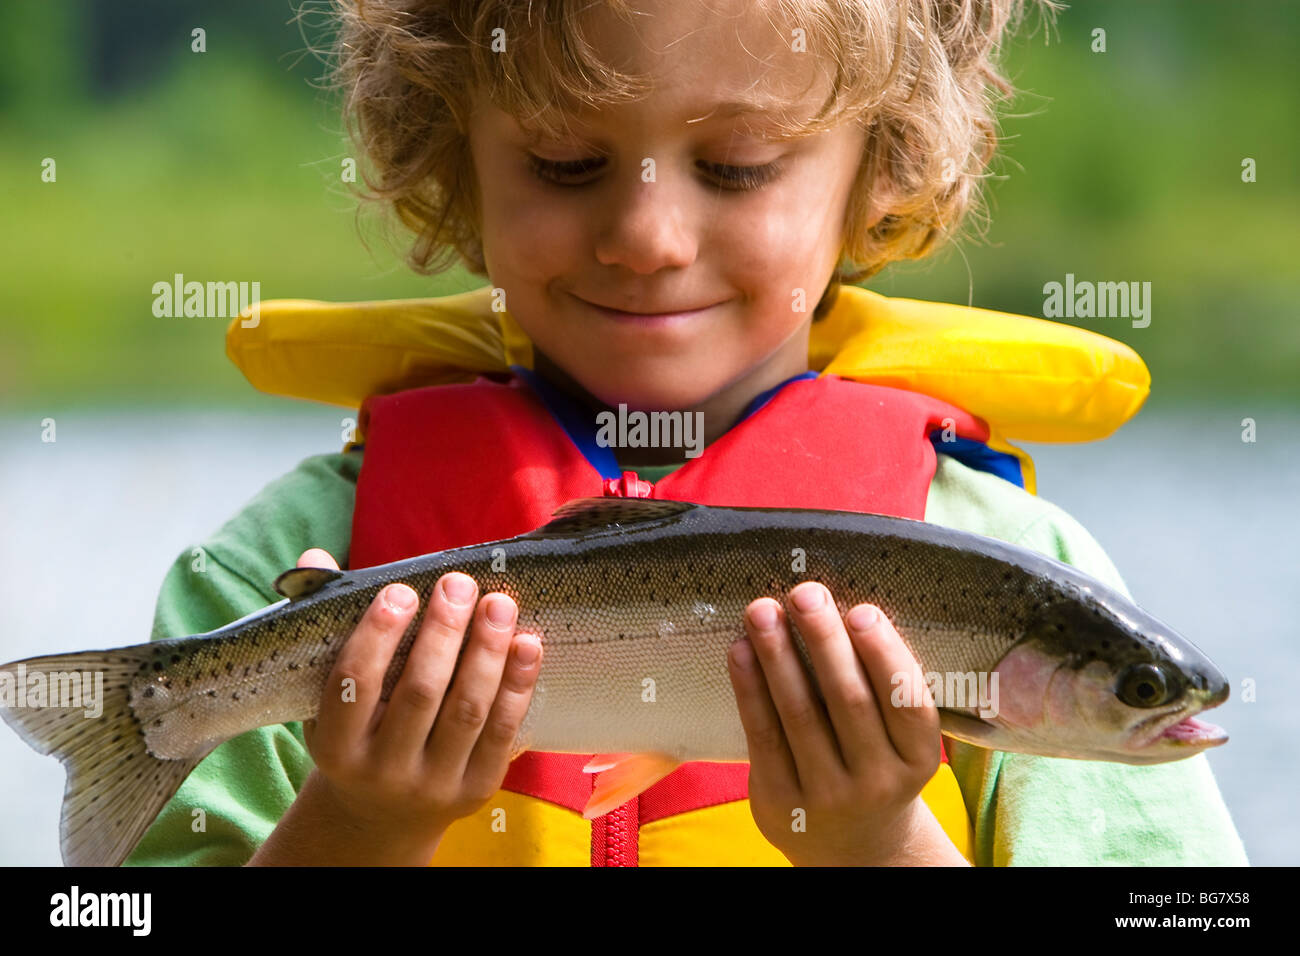 https://c8.alamy.com/comp/BG7X58/a-young-boy-fisherman-proudly-examines-the-rainbow-trout-he-caught-BG7X58.jpg